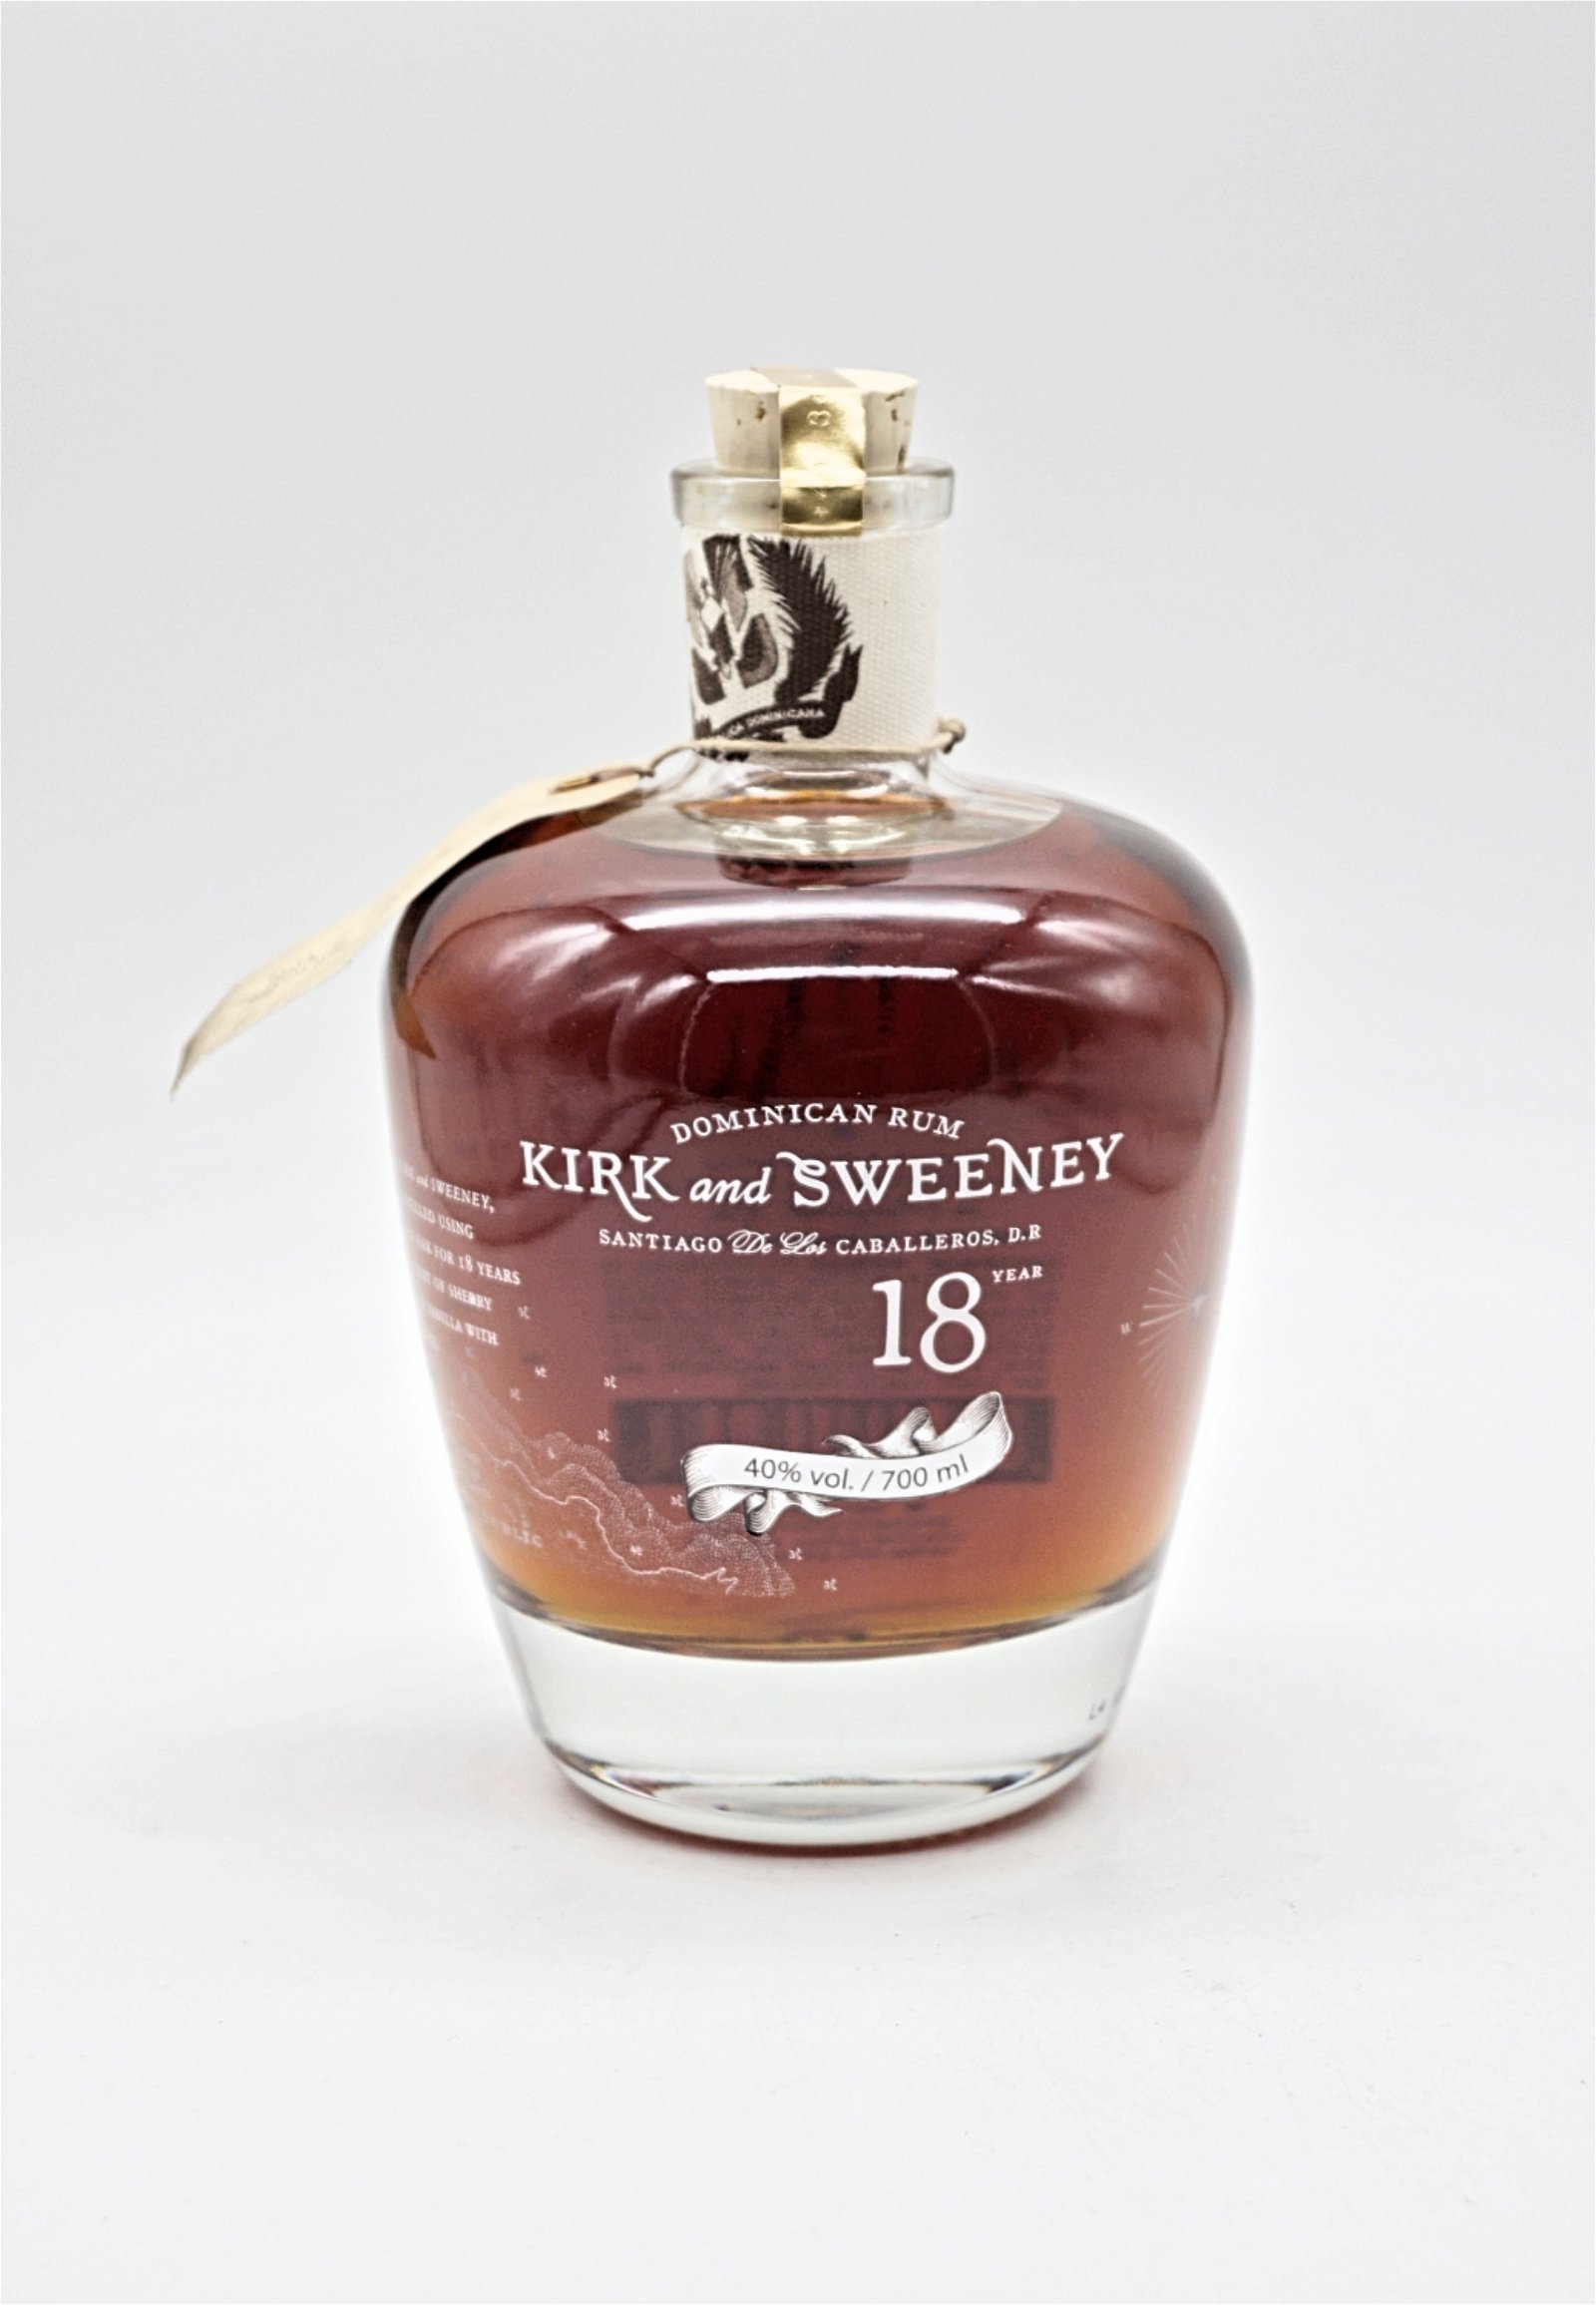 Kirk and Sweeney 18 Jahre Dominican Rum